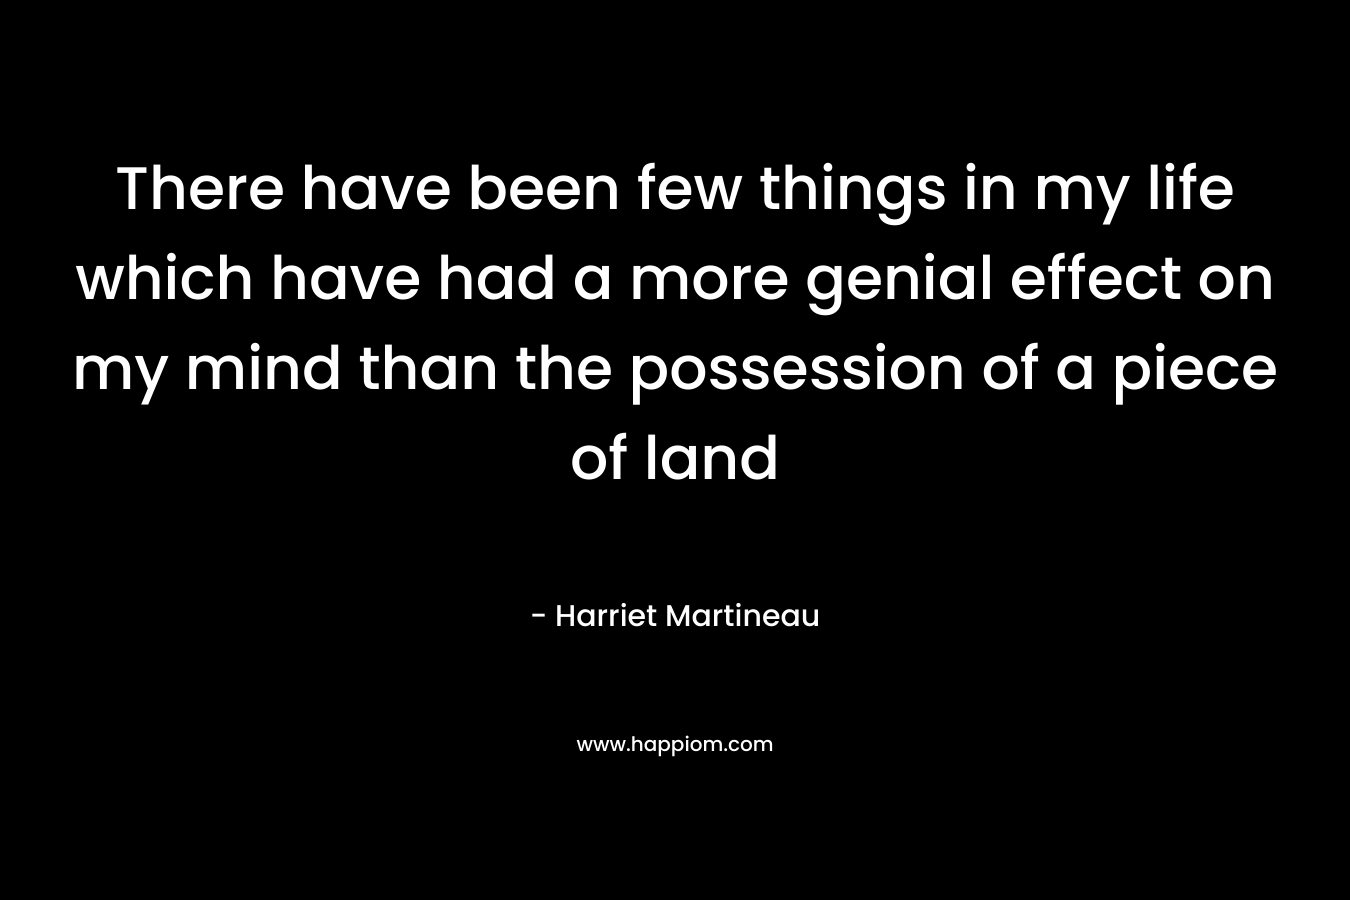 There have been few things in my life which have had a more genial effect on my mind than the possession of a piece of land – Harriet Martineau